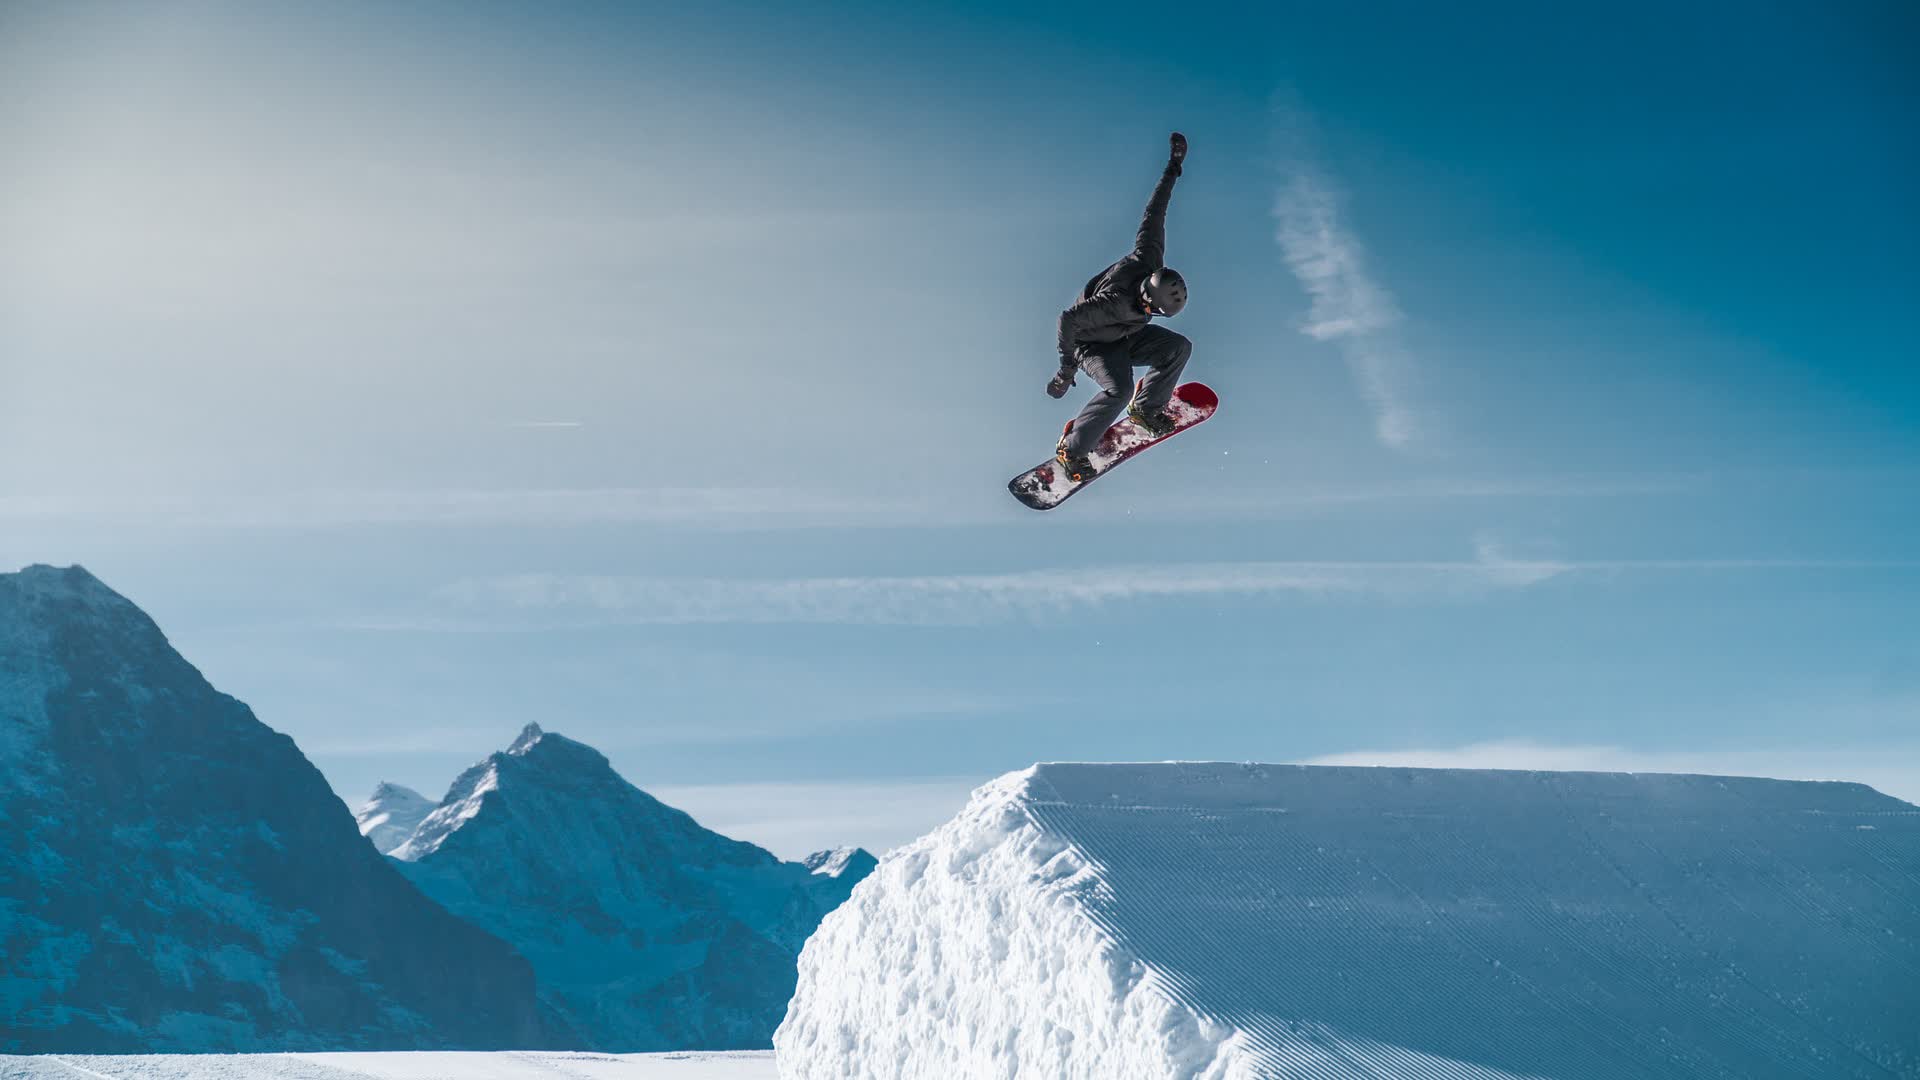 Snowboarder says iPhone's Emergency SOS saved his life after falling into crevasse